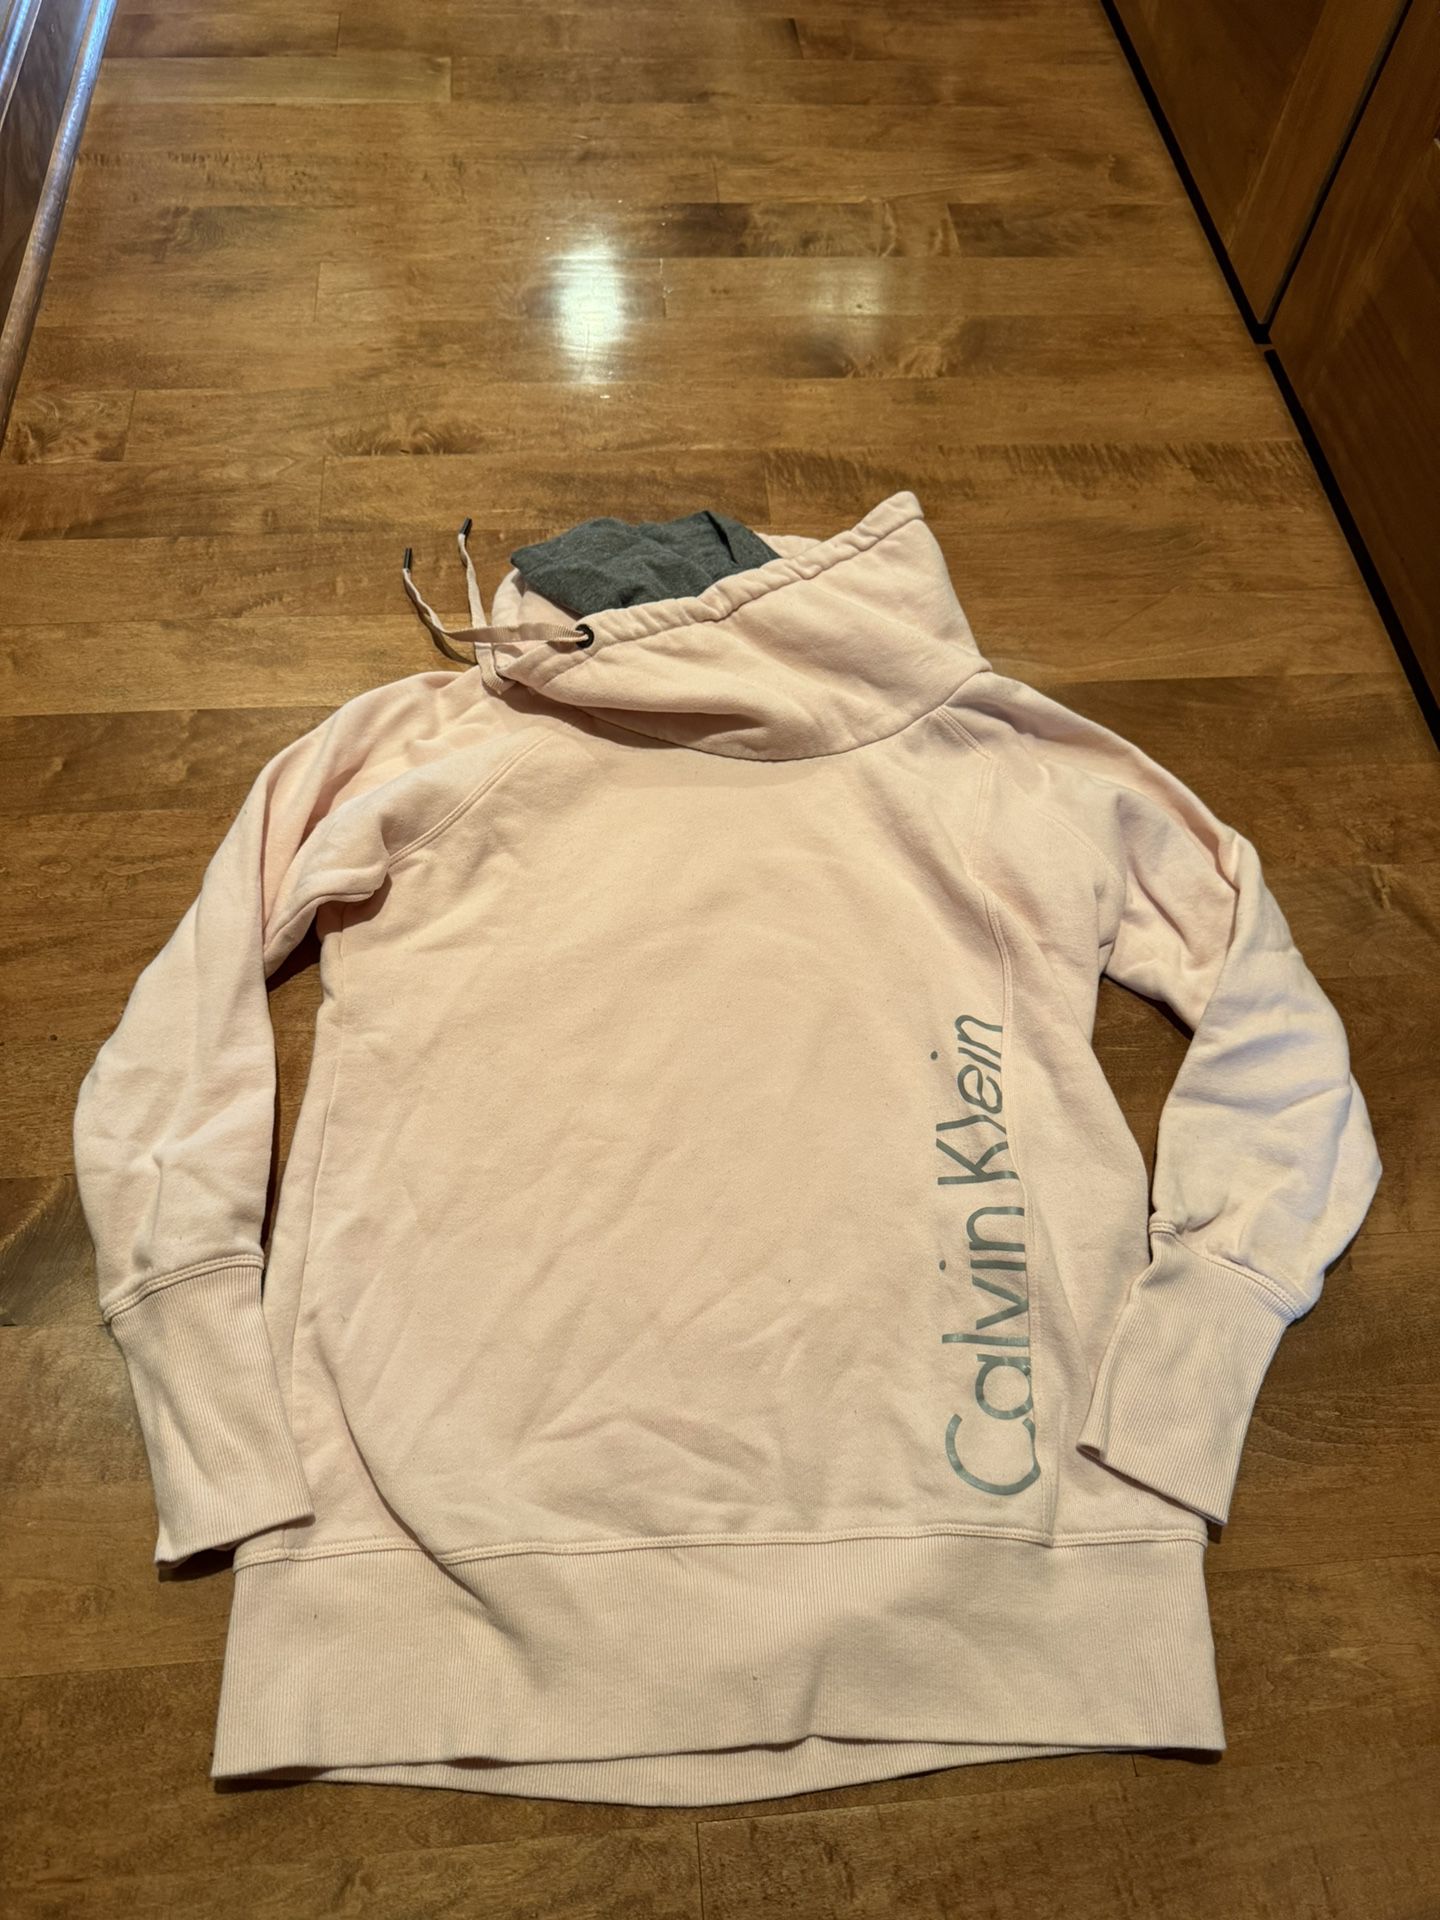 Women’s Calvin Klein hoodie shipping available